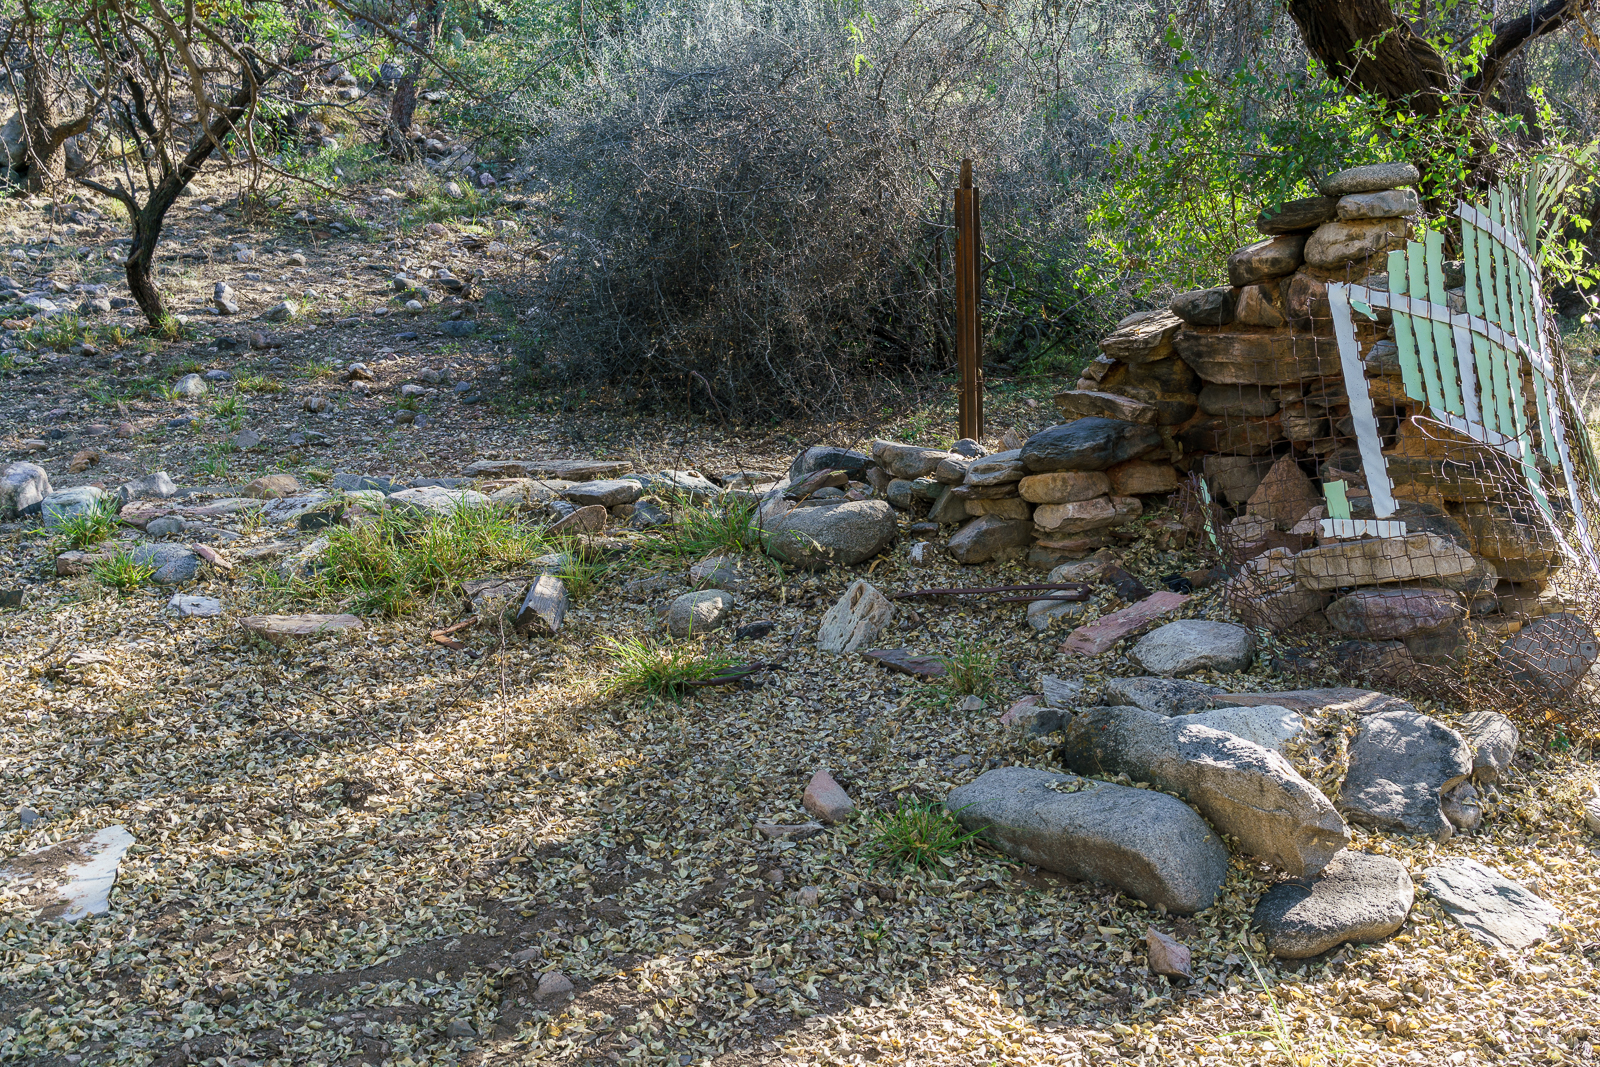 An old fireplace and fence near Alder Canyon. October 2016.